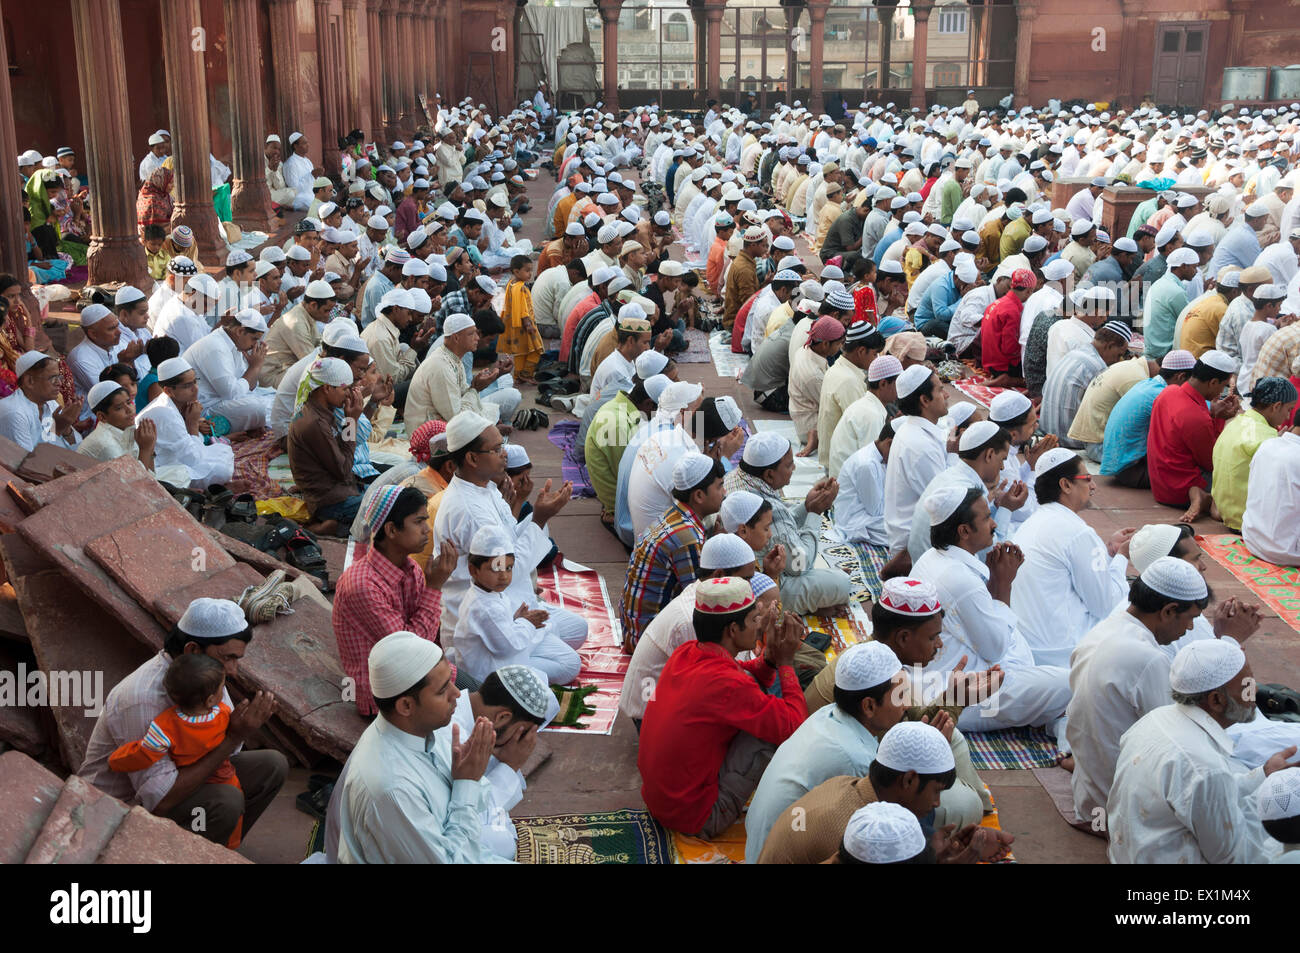 Men praying during the festival of Eid-ul-fitr at the Jama Masjid mosque in old Delhi, India. Stock Photo